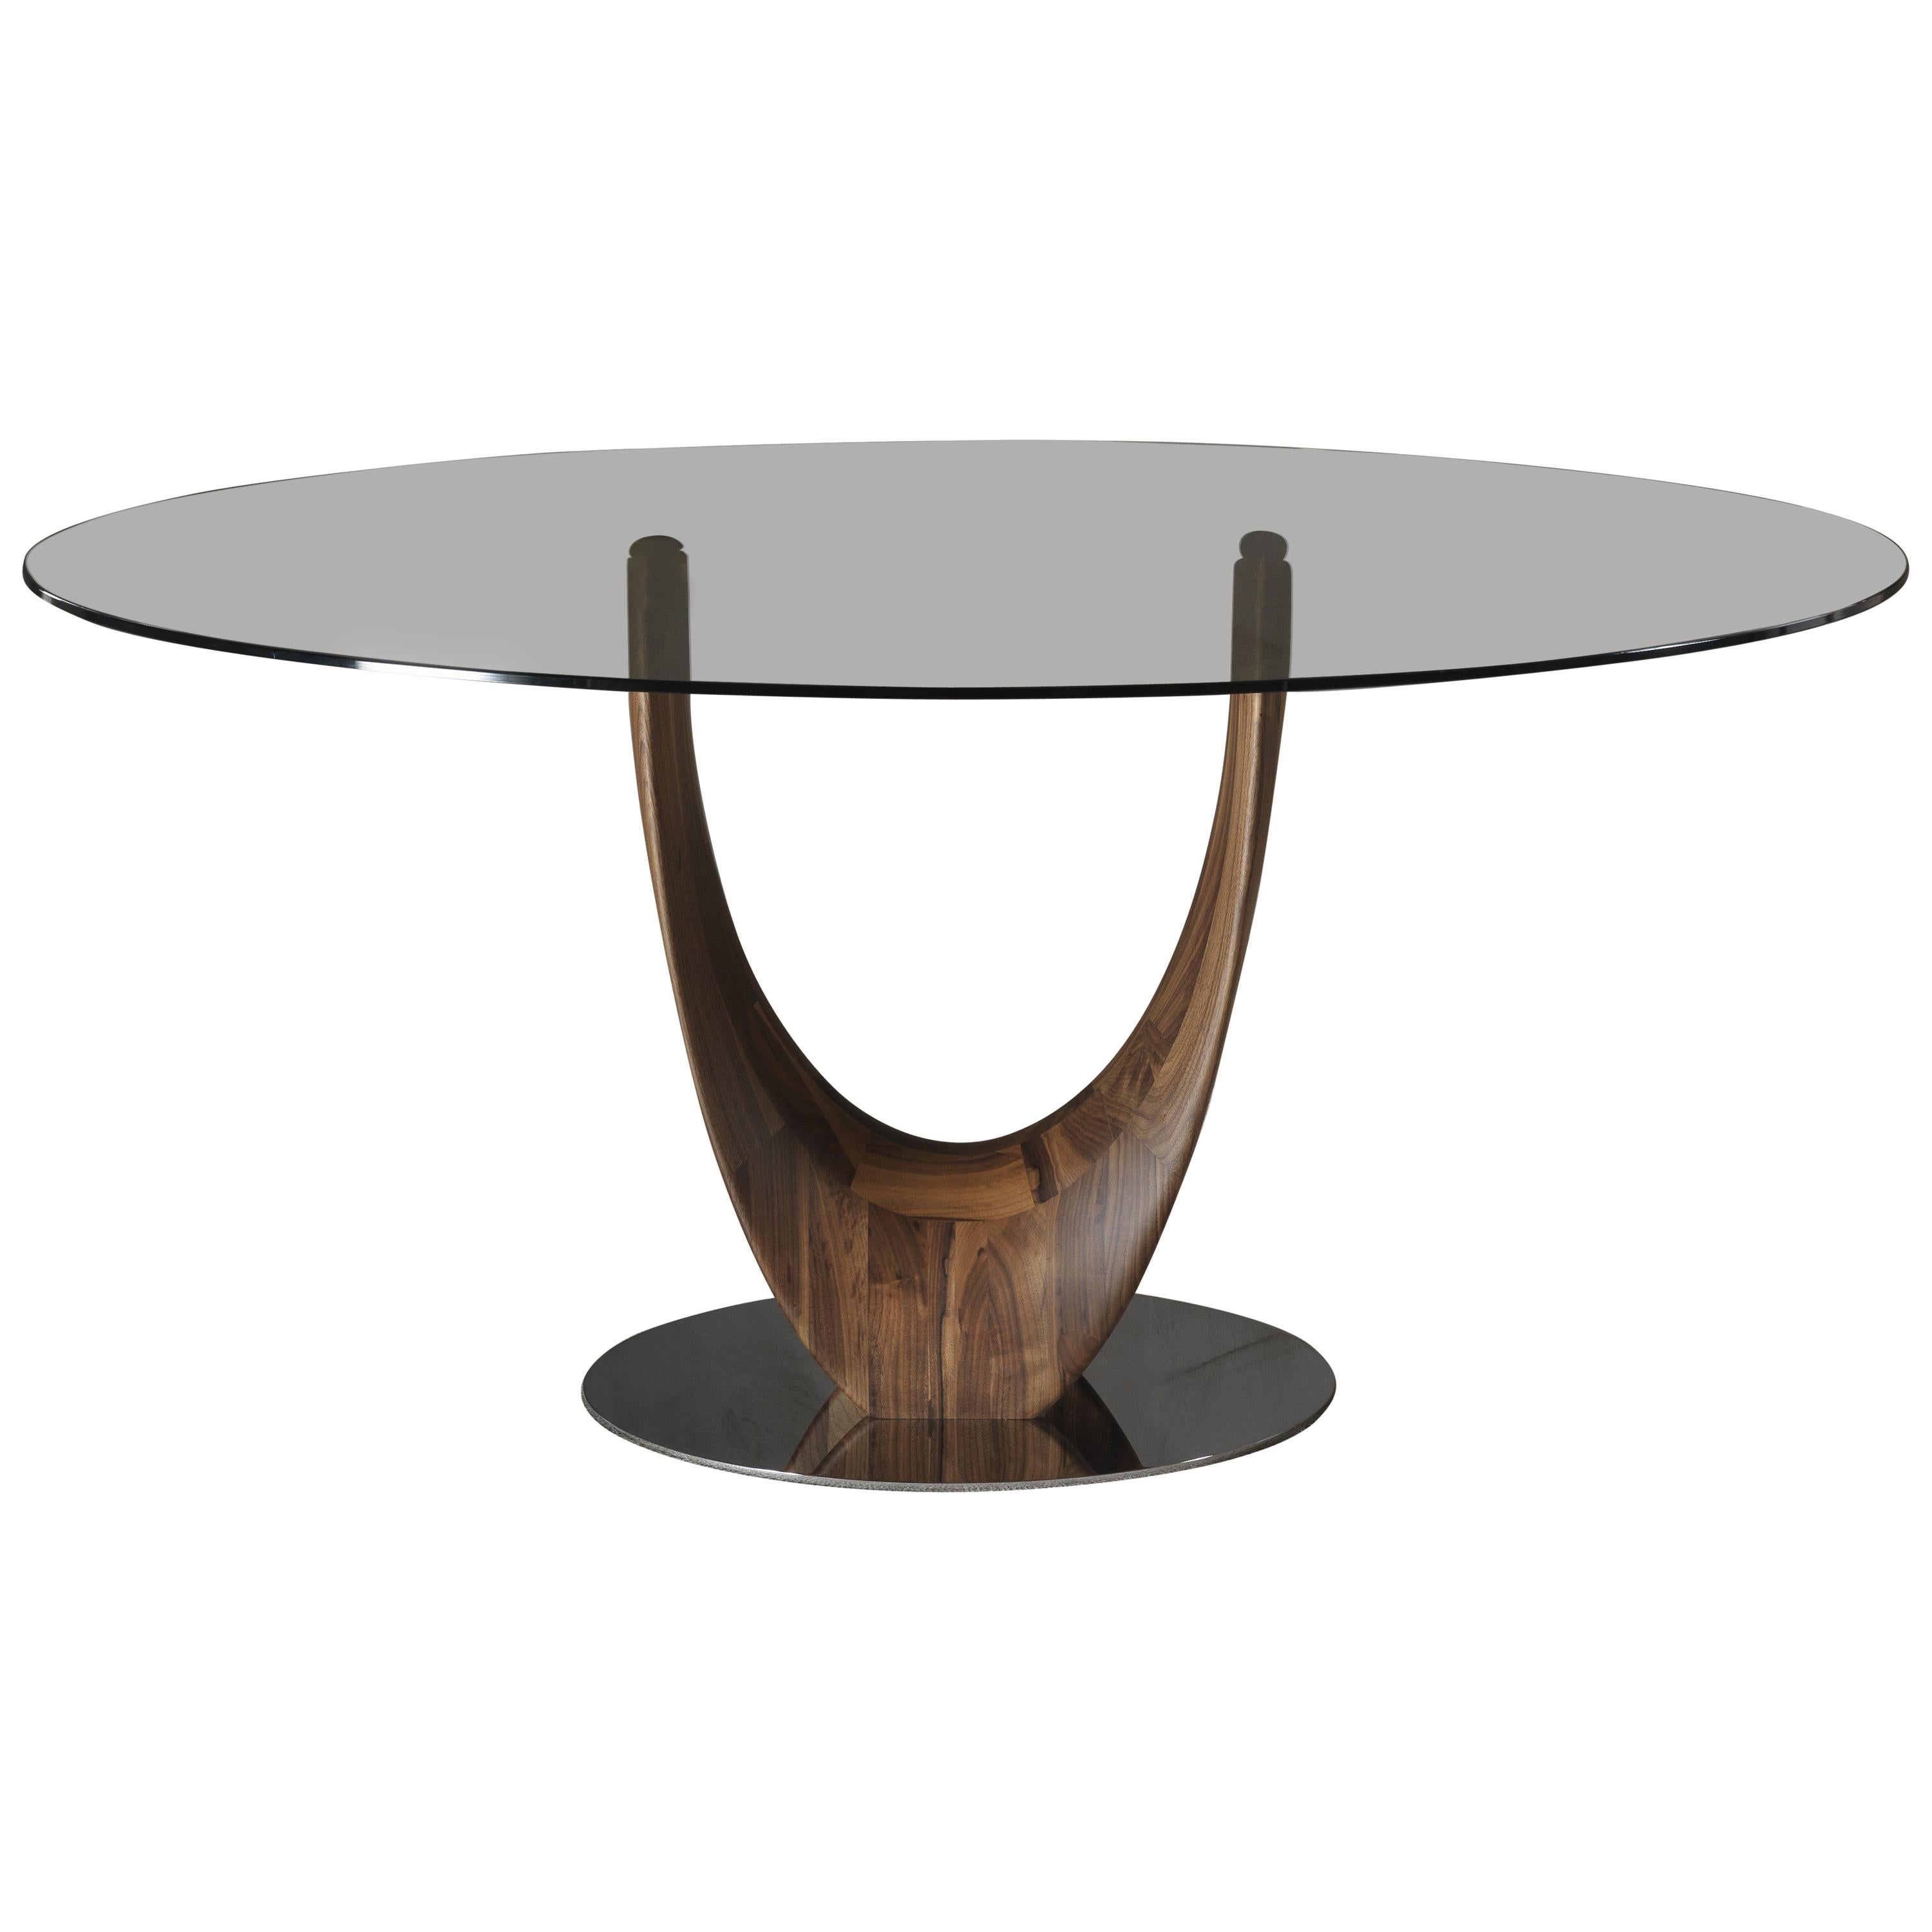 Pacini & Cappellini Axis Round Dining Table in Glass and Lacquer by Stefano Bigi For Sale